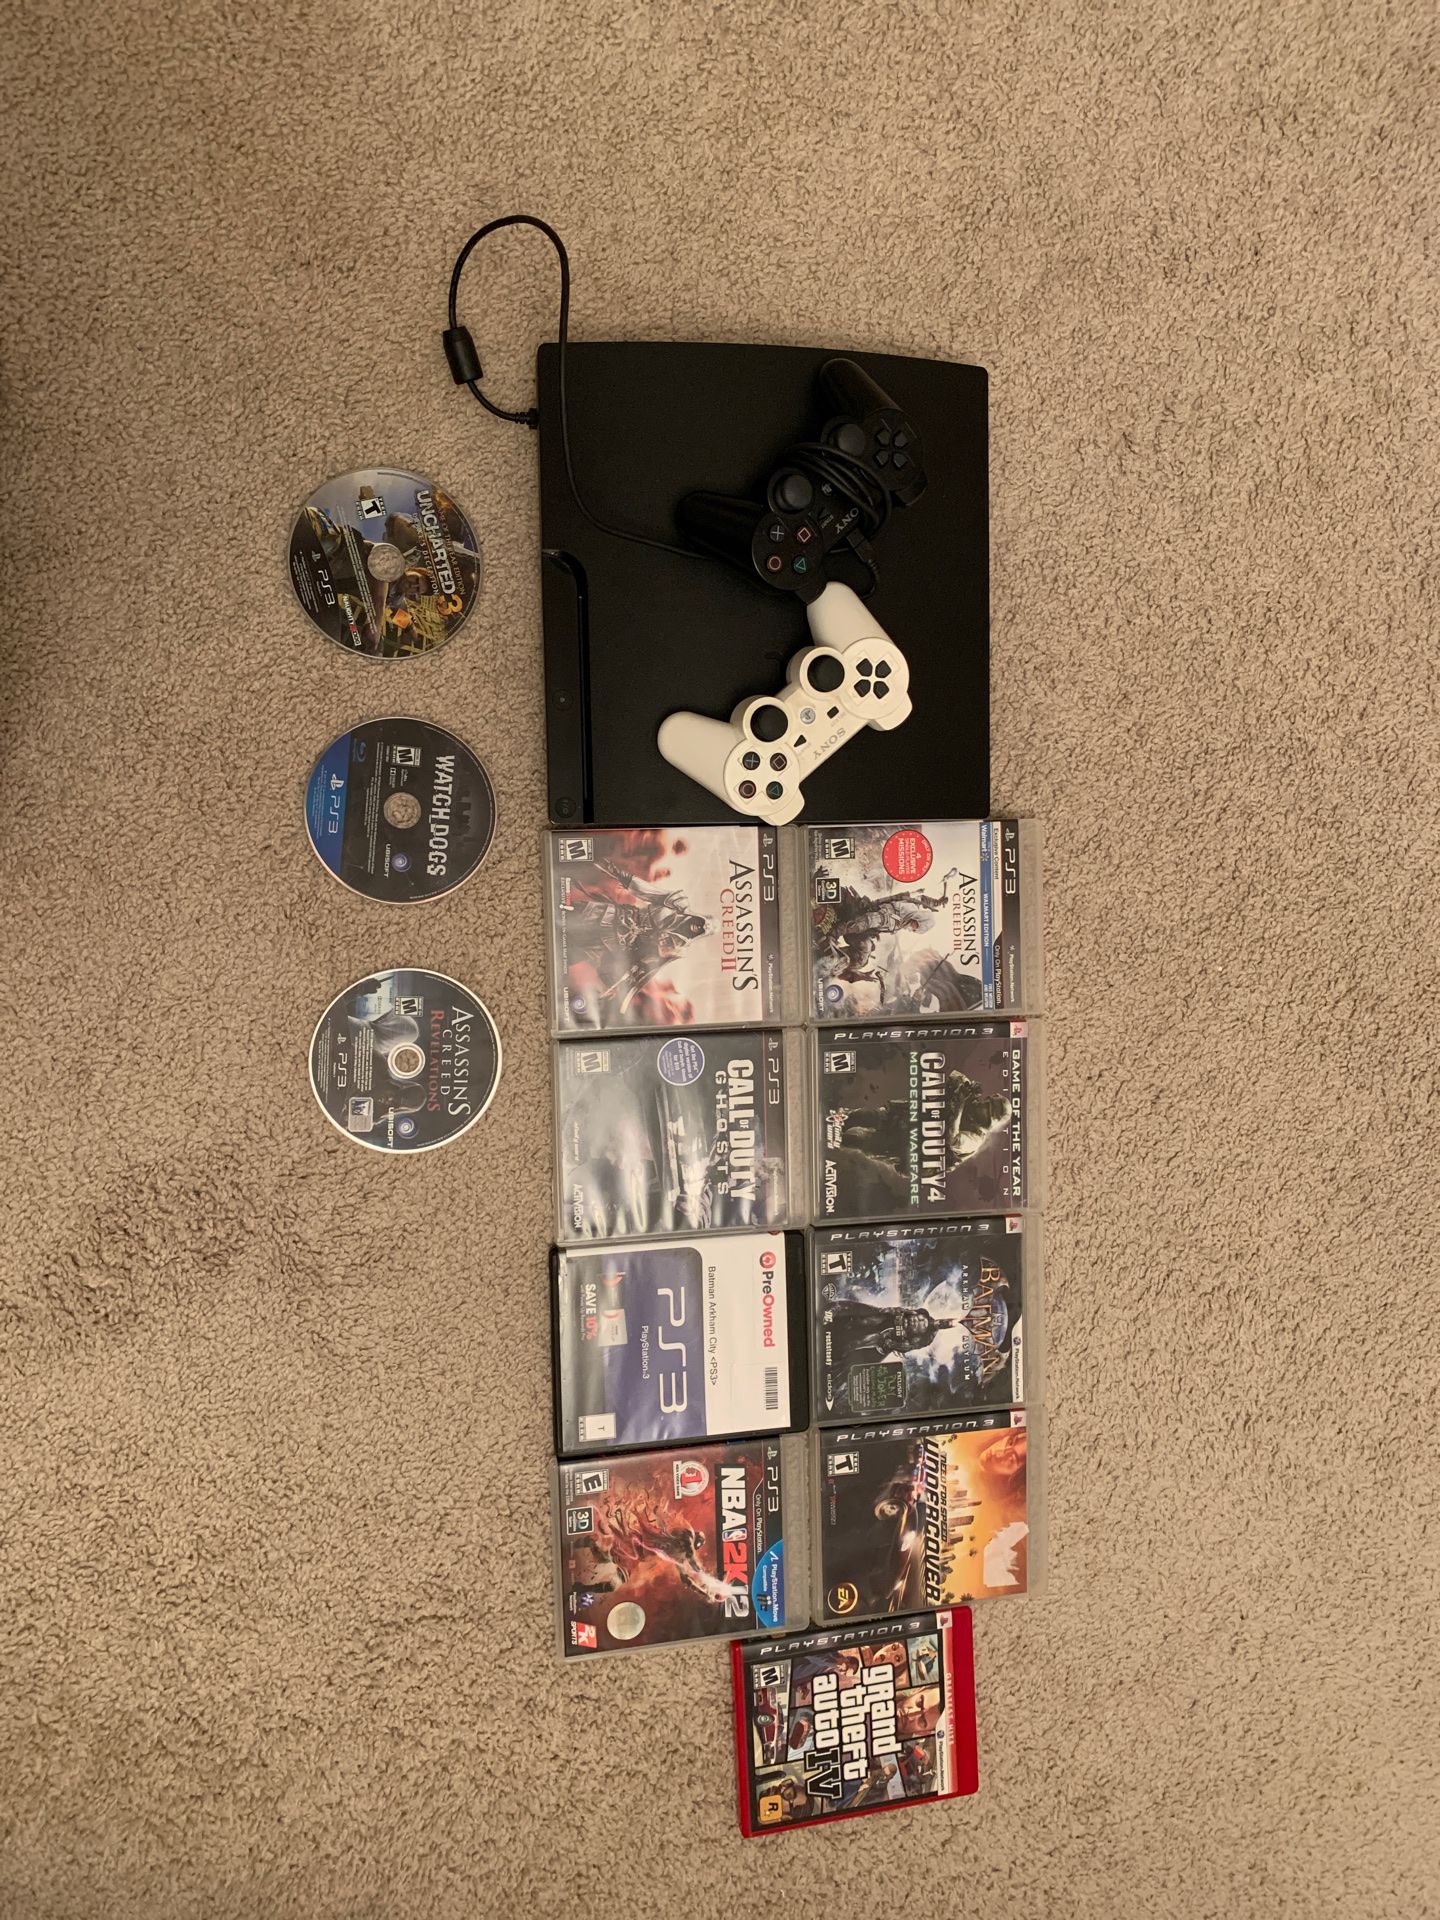 PS3 console (w/ 2 controllers, controller charging wire, and 12 PS3 games)